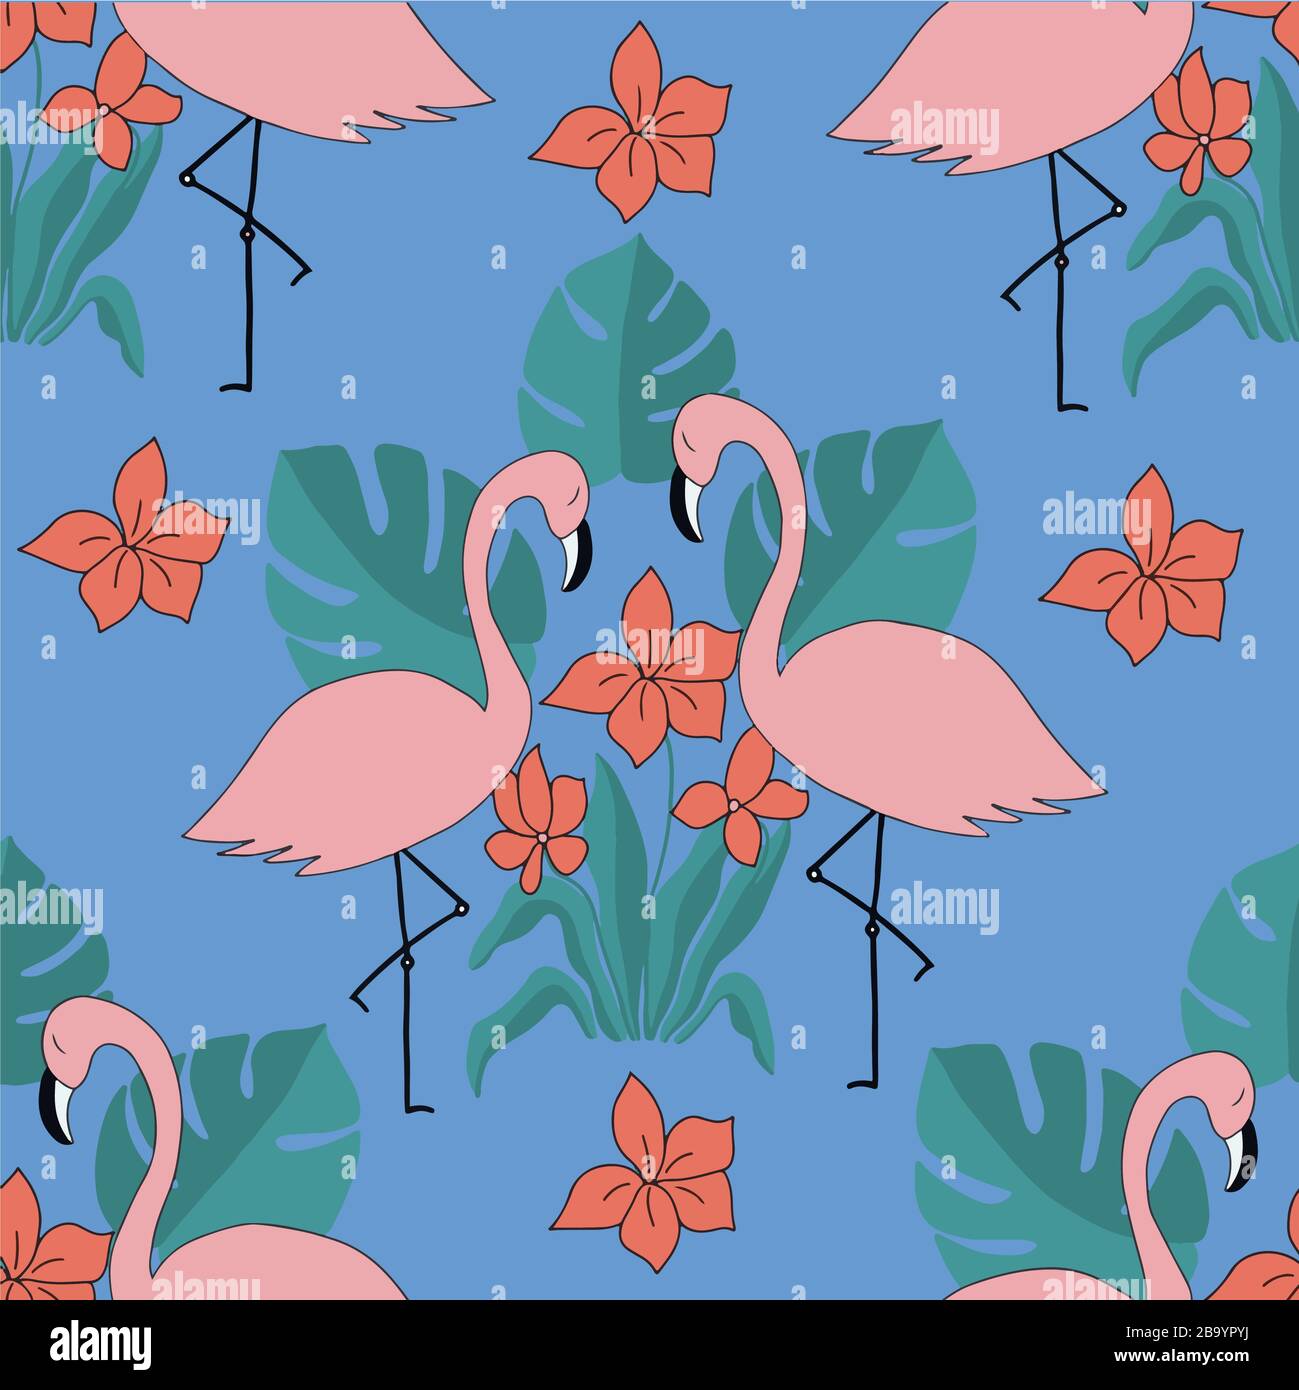 Seamless pattern with the image of pink flamingos, red flowers and leaves on a blue background. For the design of wallpapers, textiles, phone covers Stock Vector